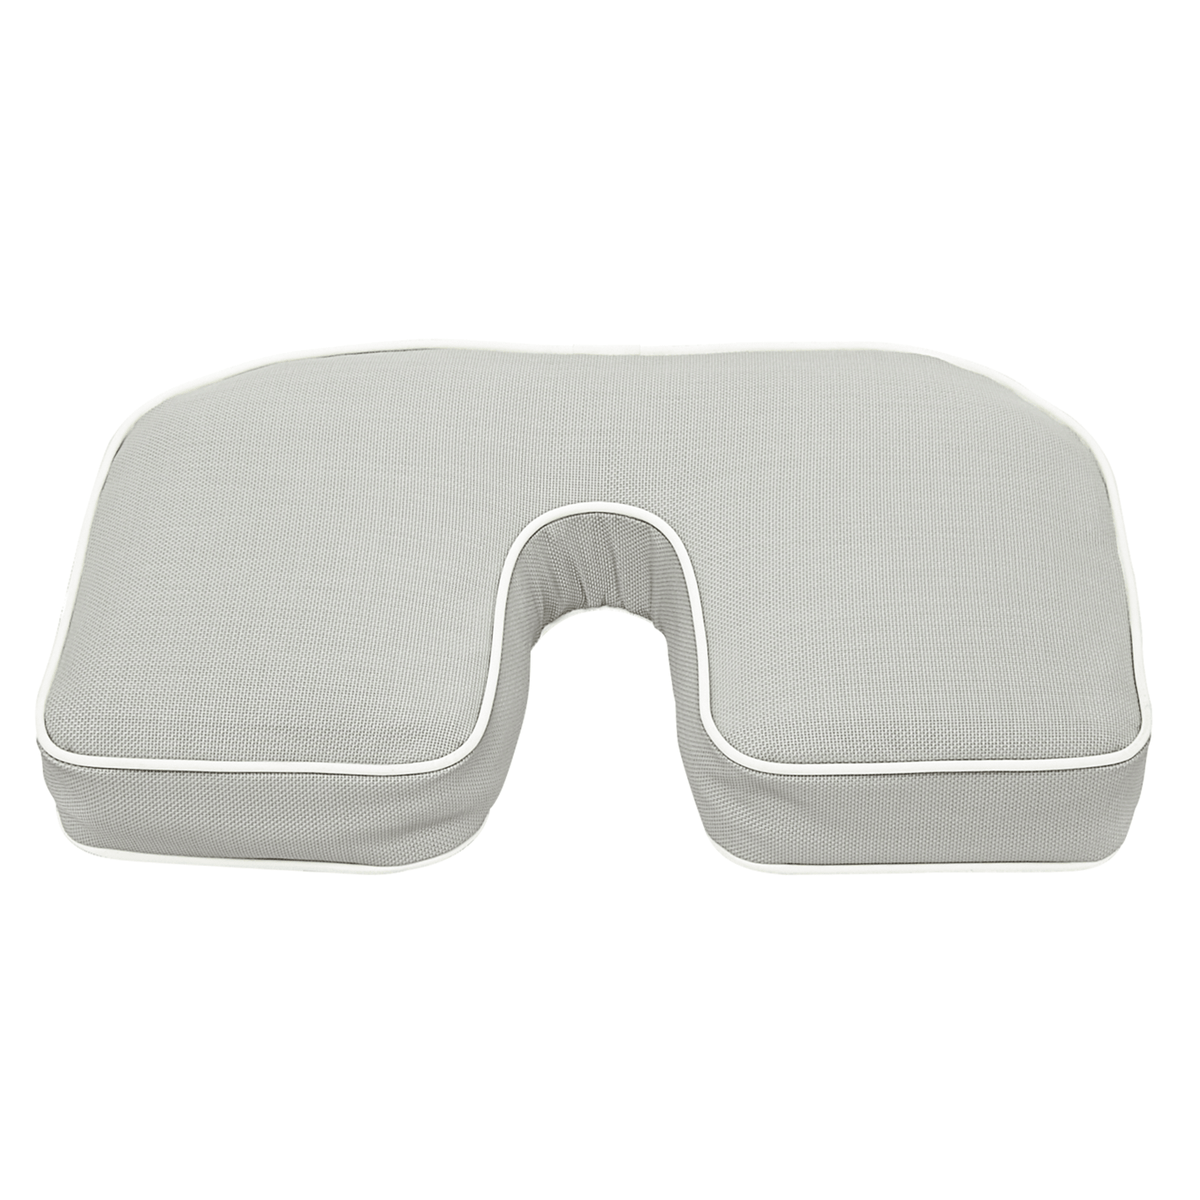 ELLA&#39;S BUBBLES Standard Shape: Seat Pillow and Riser for Walk-In Tubs – SeatRiser-3 (20 1/2″W x 13″L x 3 1/2″H)